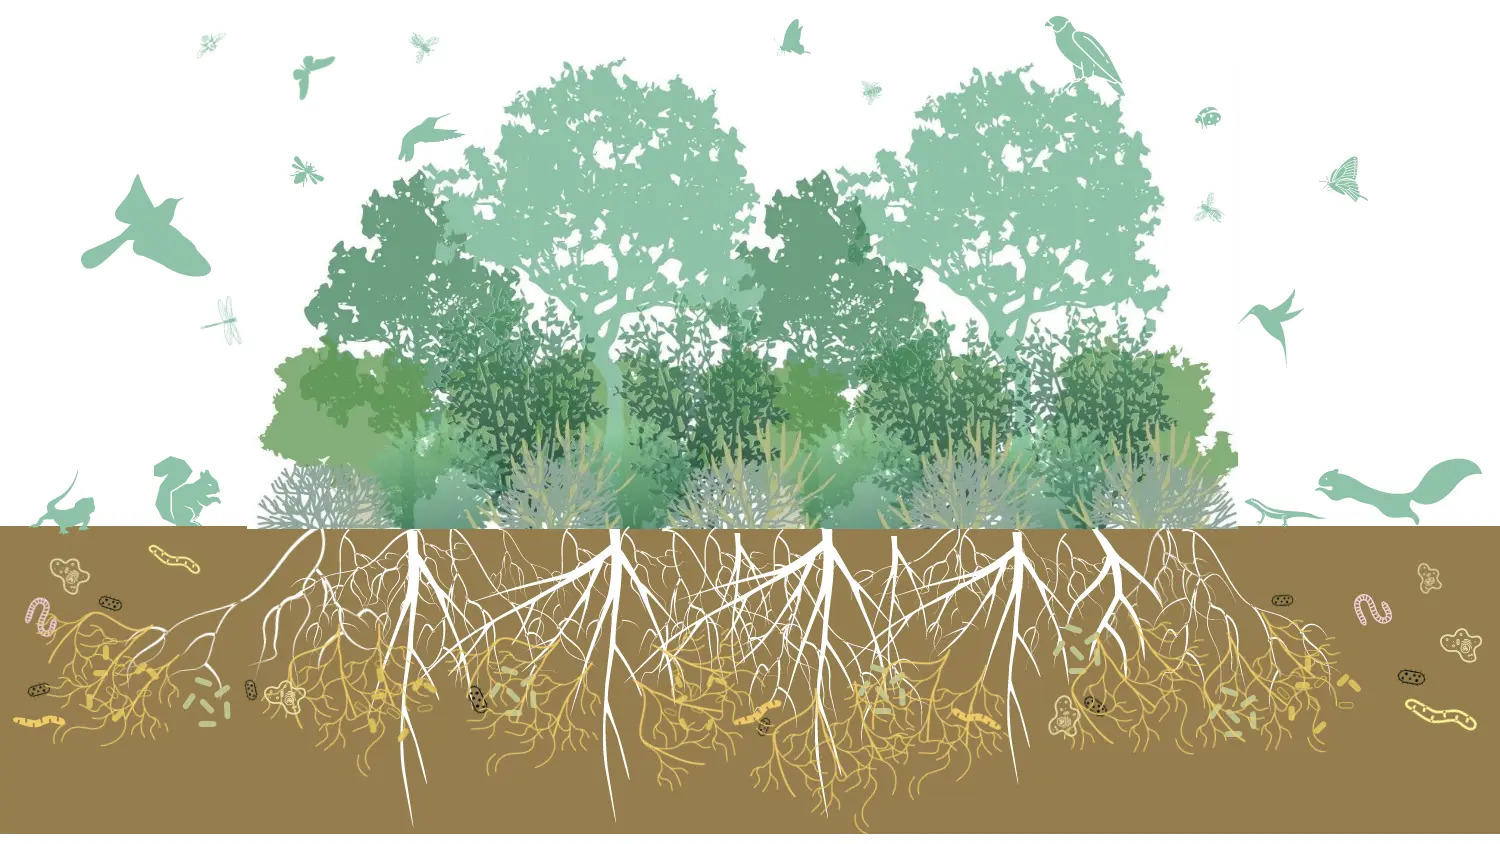 Graphic depicting trees and shrubs planted in the micro forest style. Above ground are various birds, insects, squirrels and lizards that are moving towards the forest.  Below ground shows the roots of the trees and shrubs with associated bacteria, fungi, and other microorganisms.